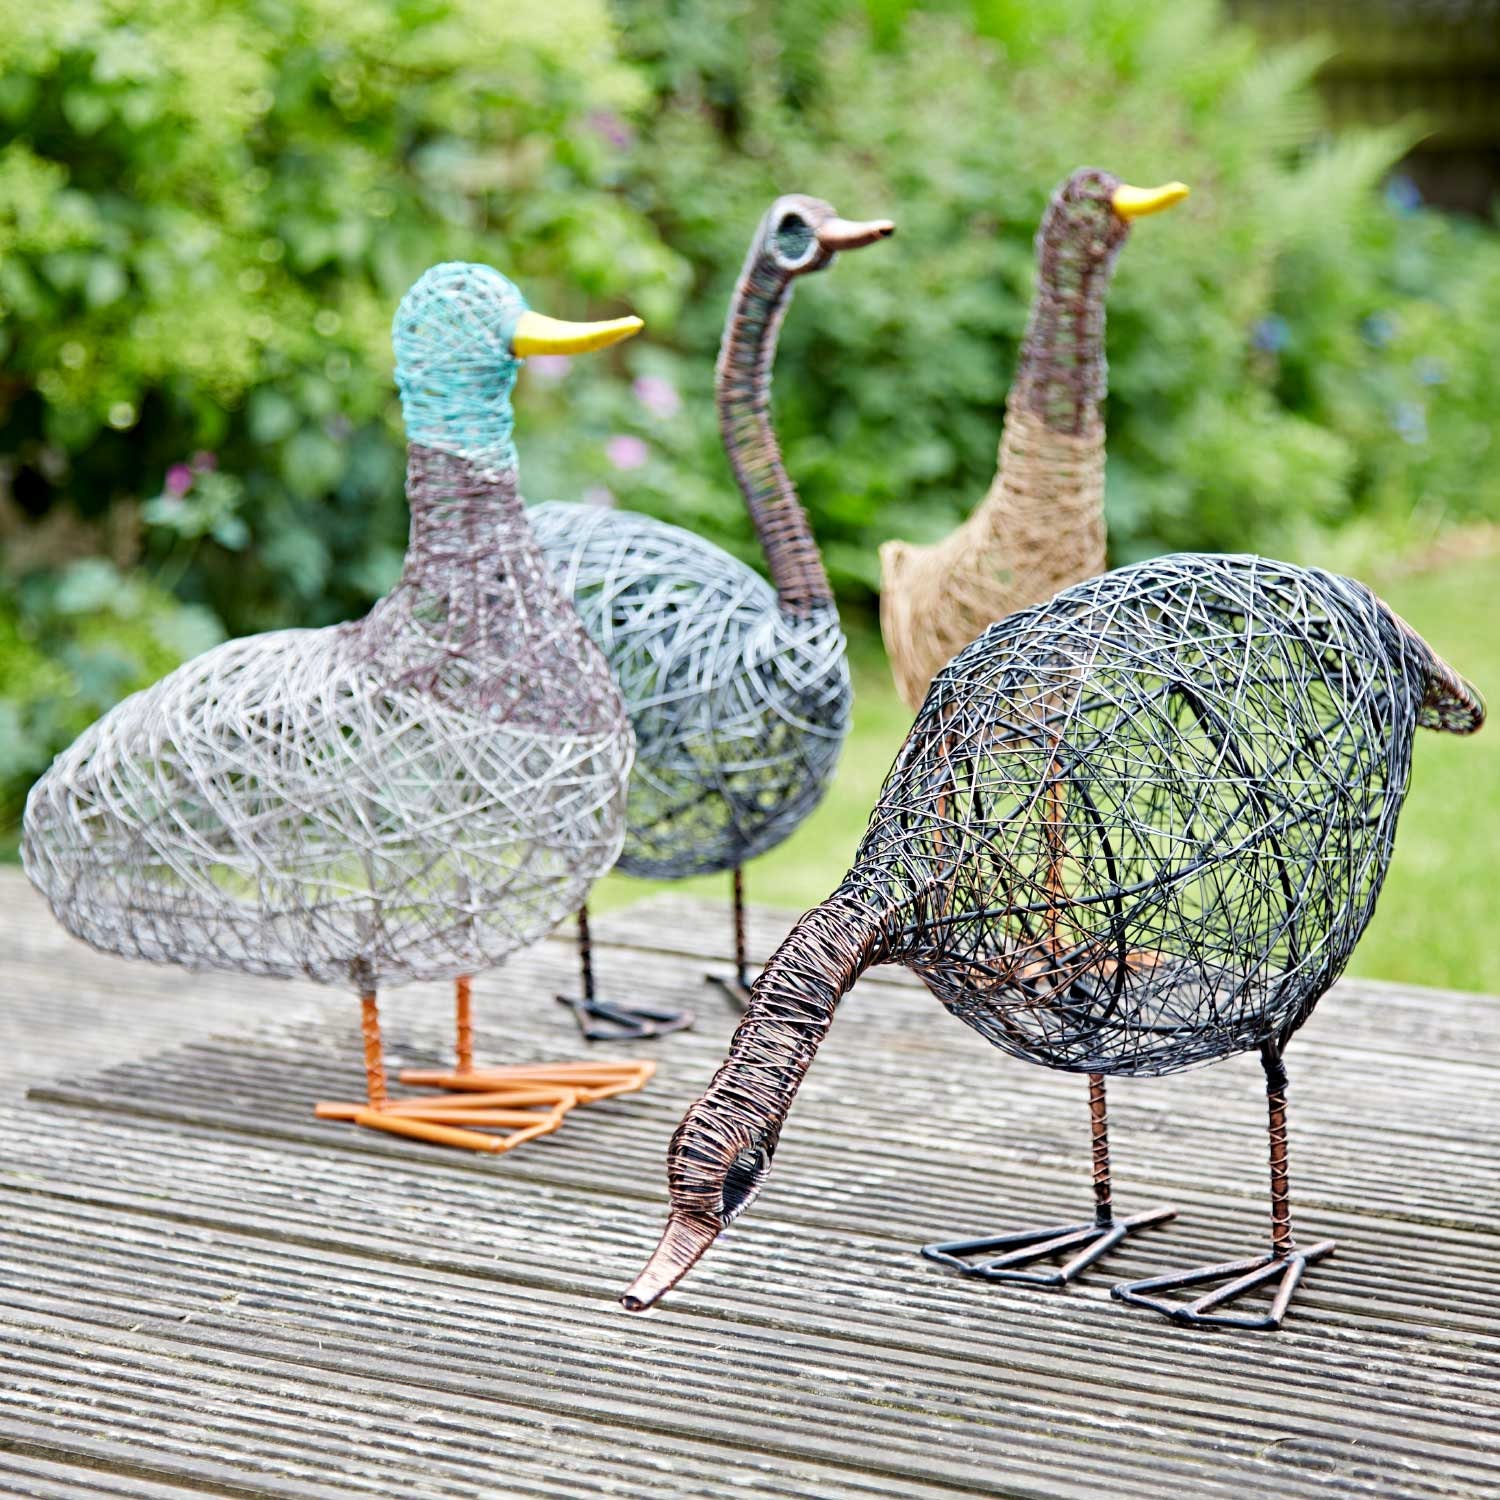 Hot Selling Customized Color Duck Figurine Garden Home Decoration